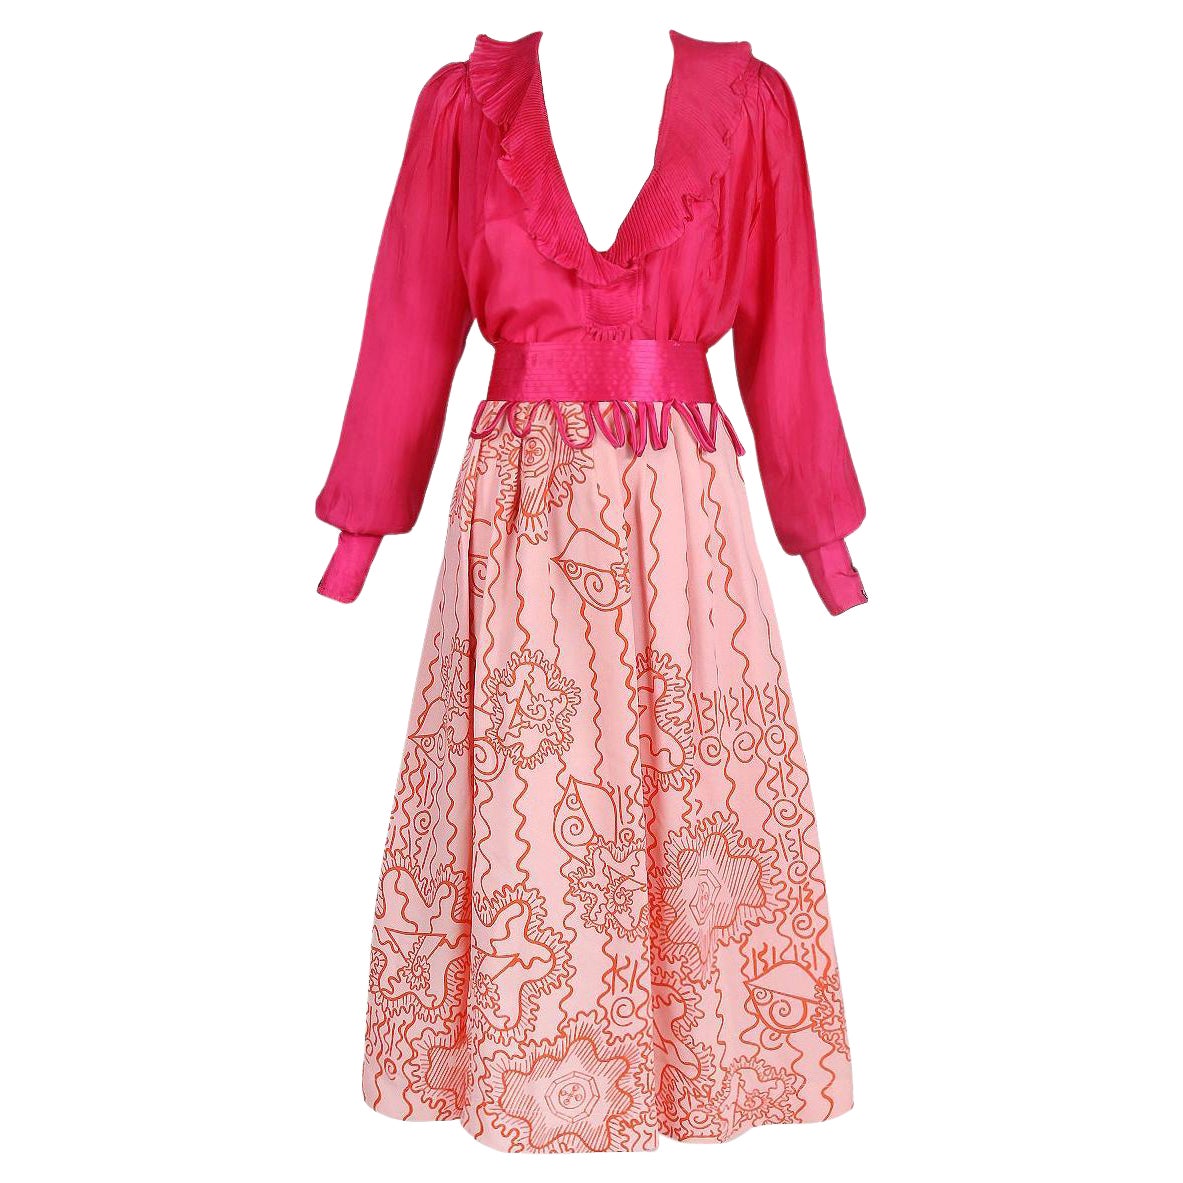 Zandra Rhodes Suits, Outfits and Ensembles